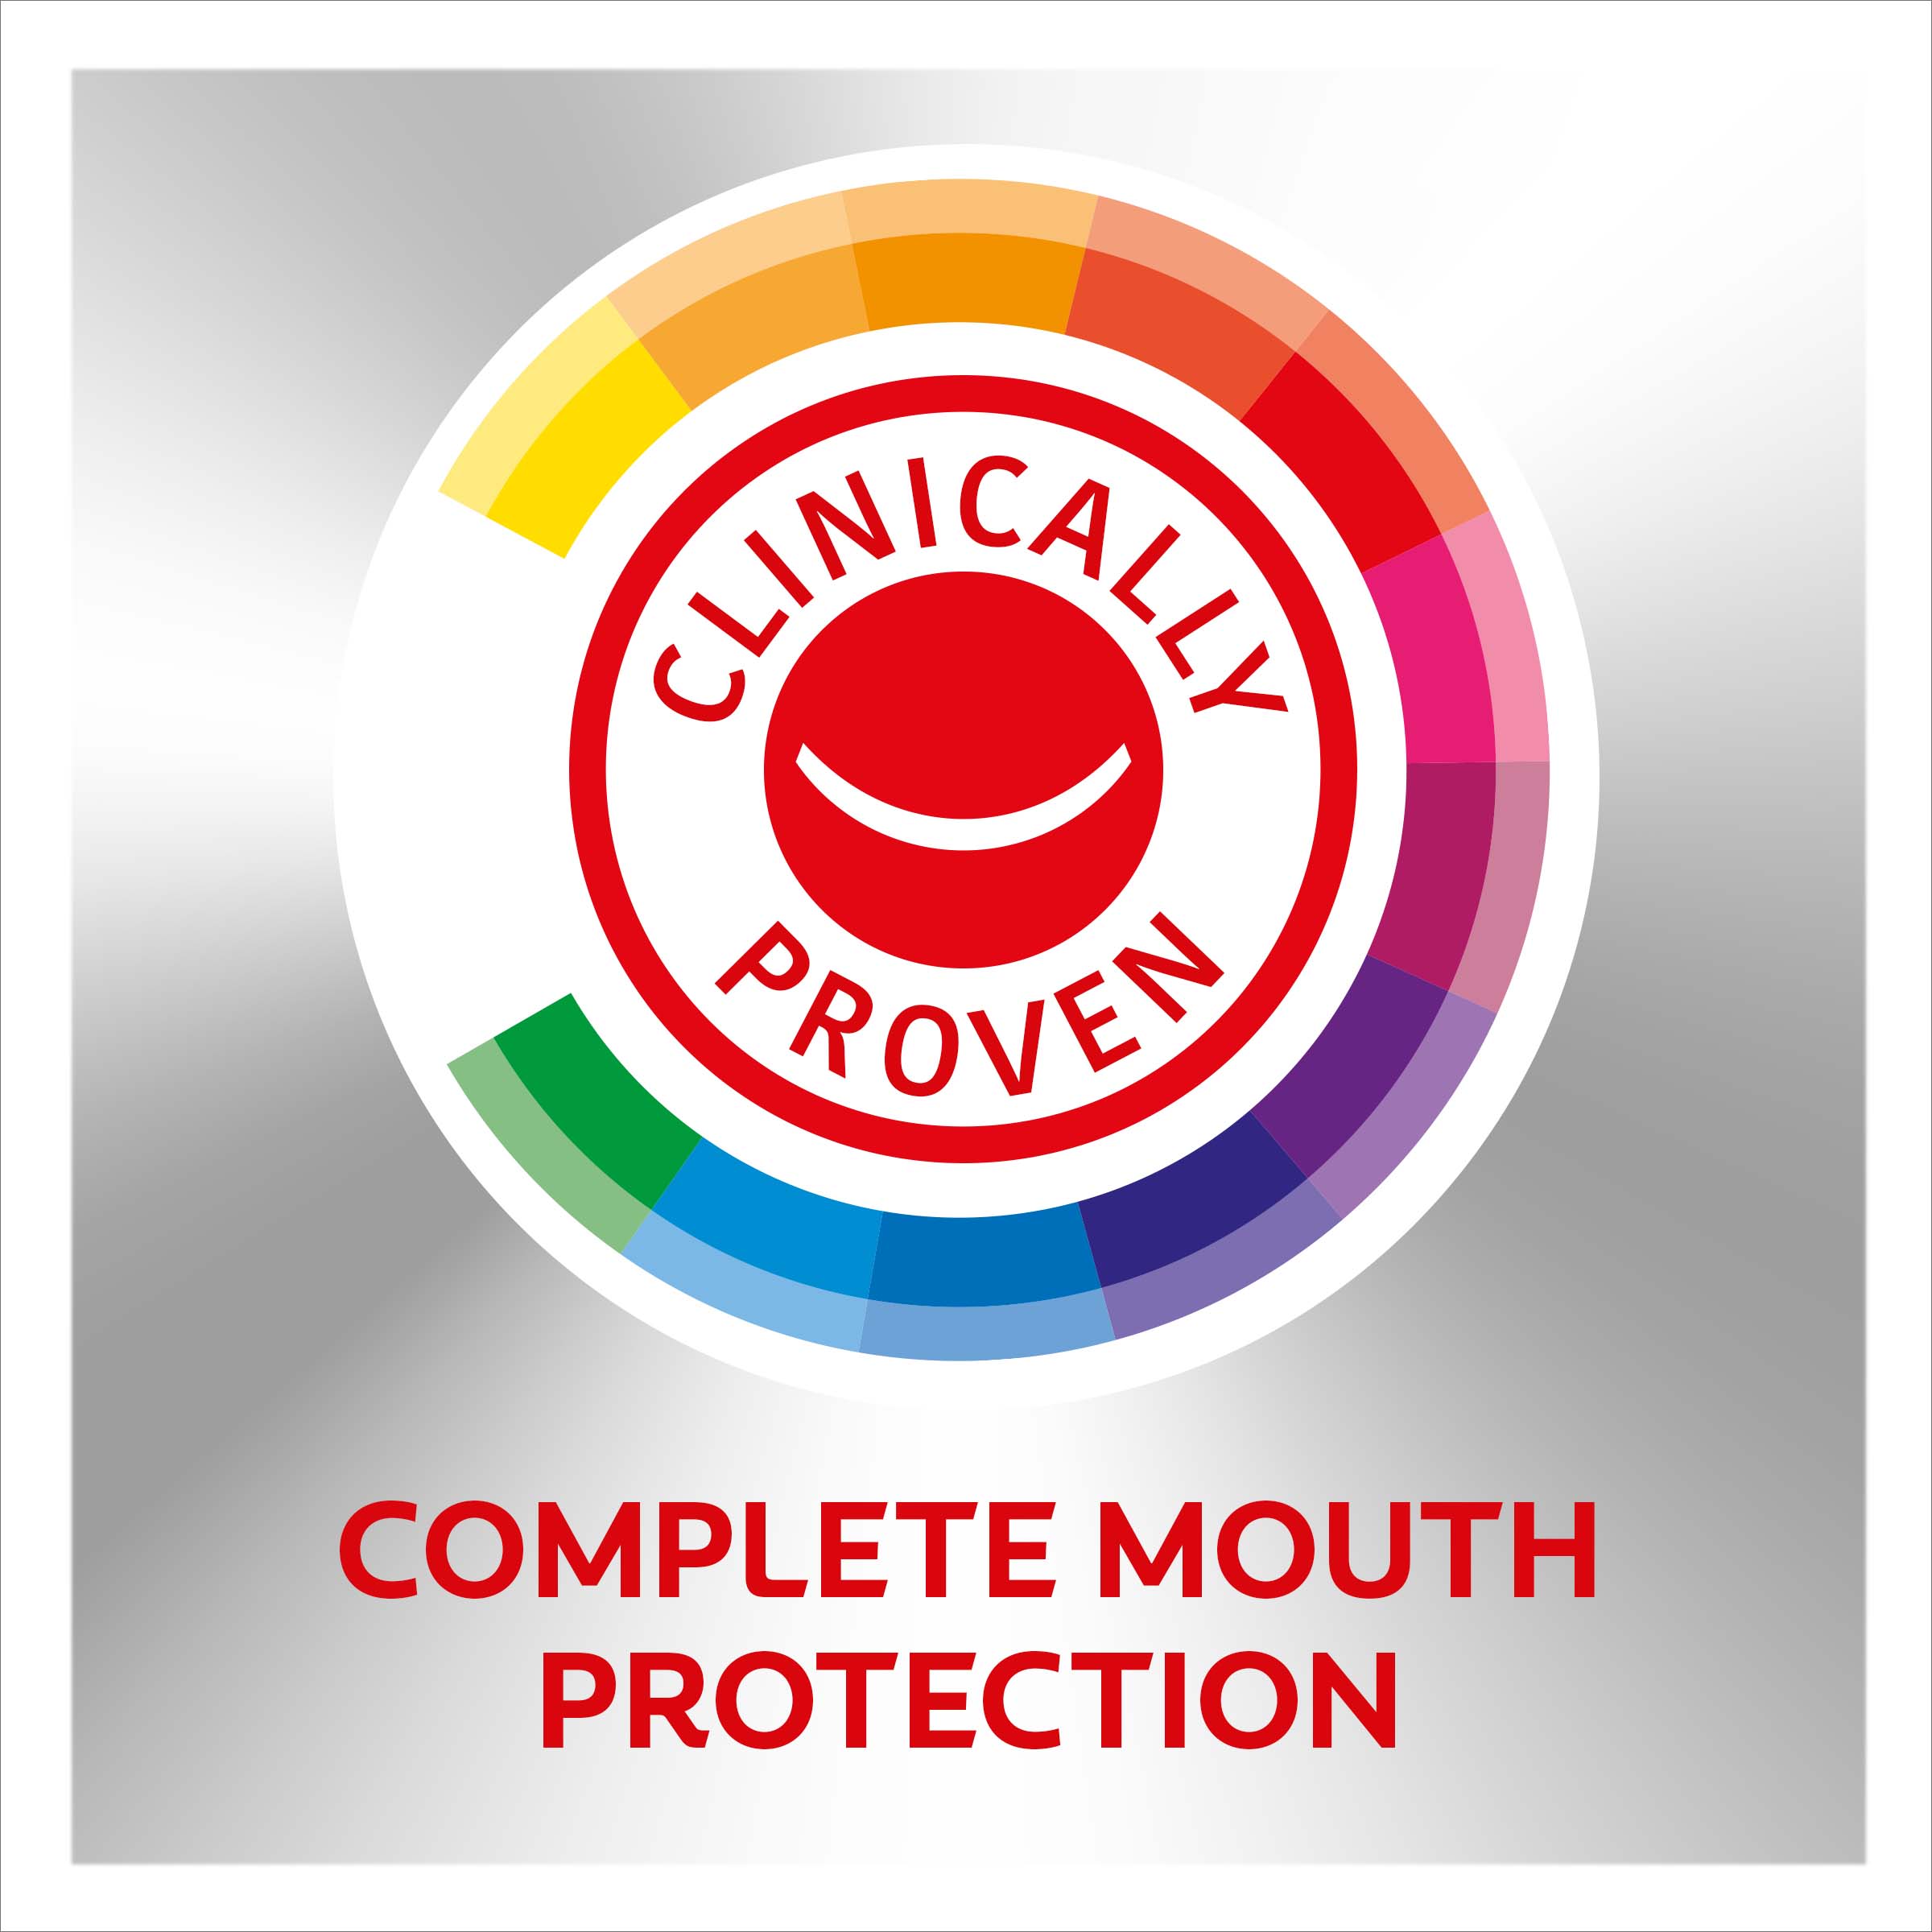 Clinically proven for whole mouth health